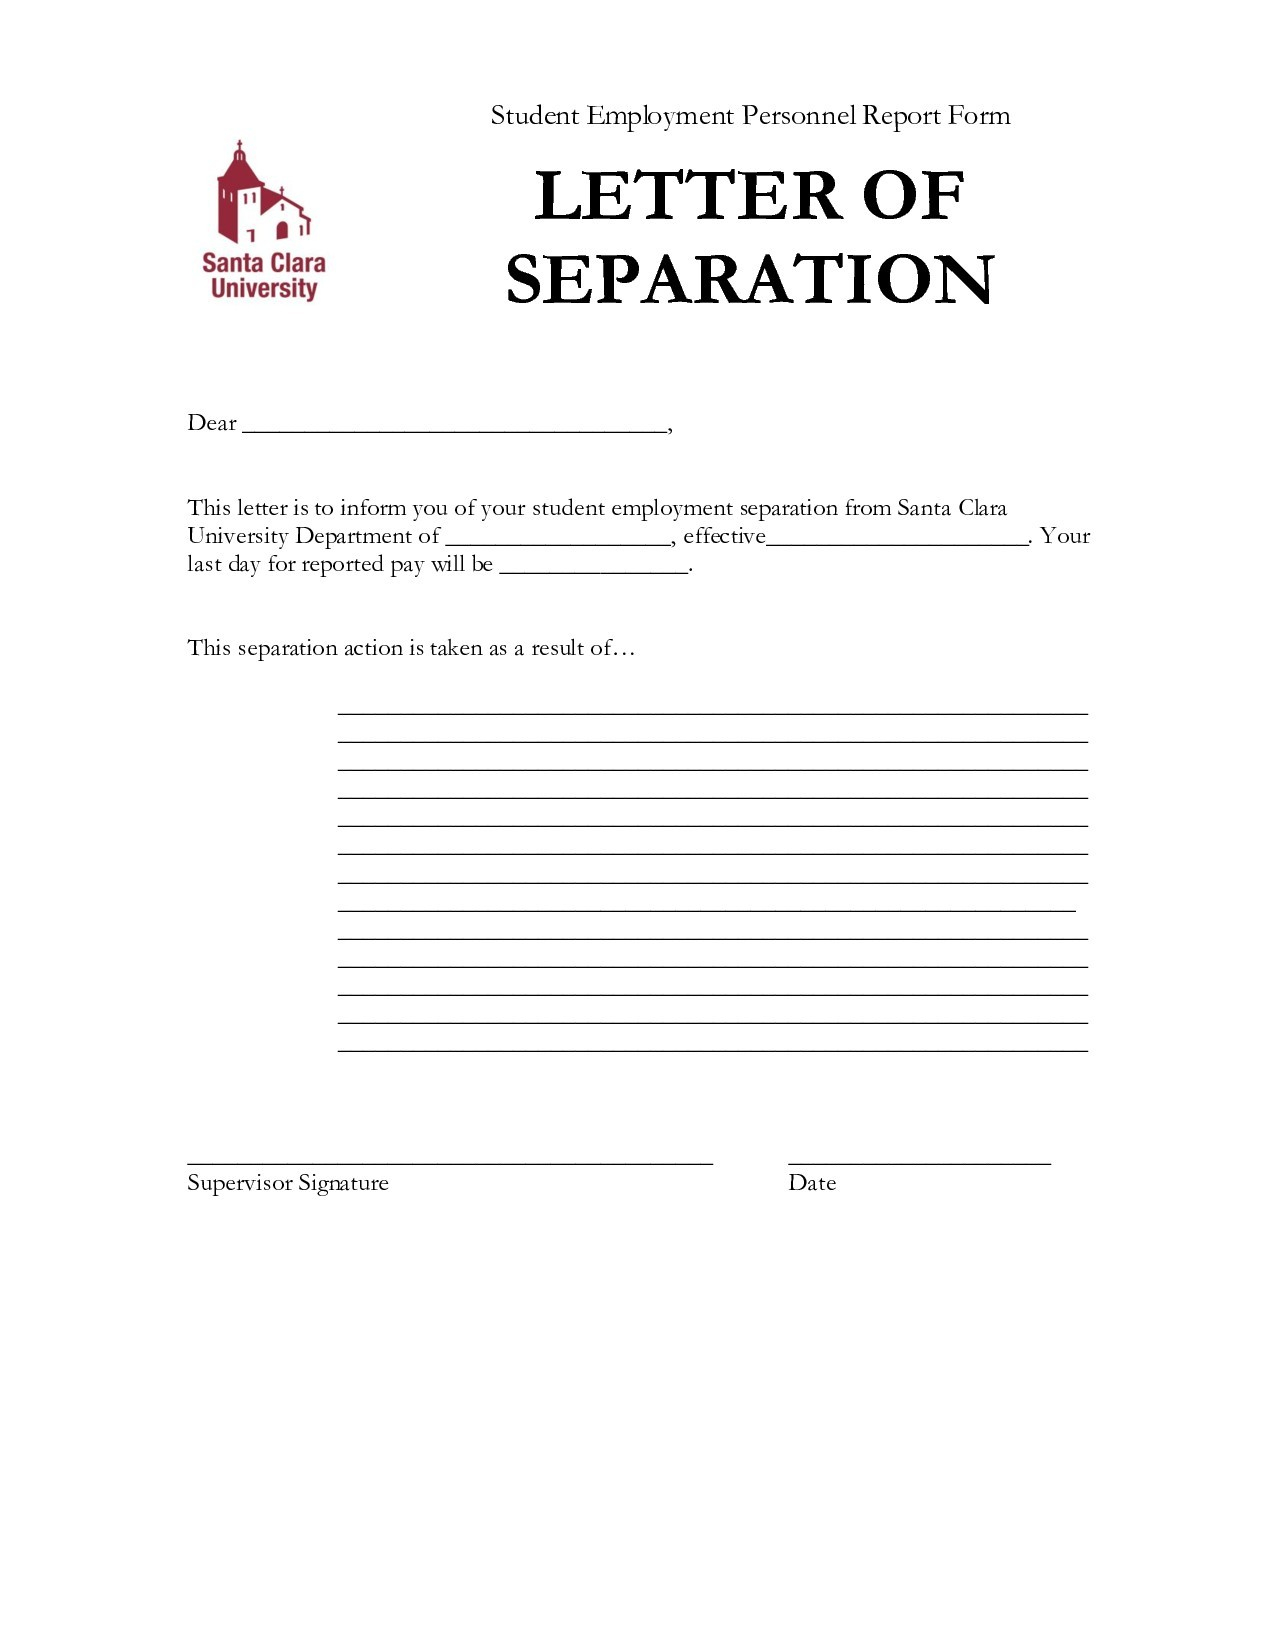 letter of separation from employer template Collection-Fresh Certificate Employment Sample for Service Crew Gallery New New Certificate Employment Separation Sample Copy Employment 19-n